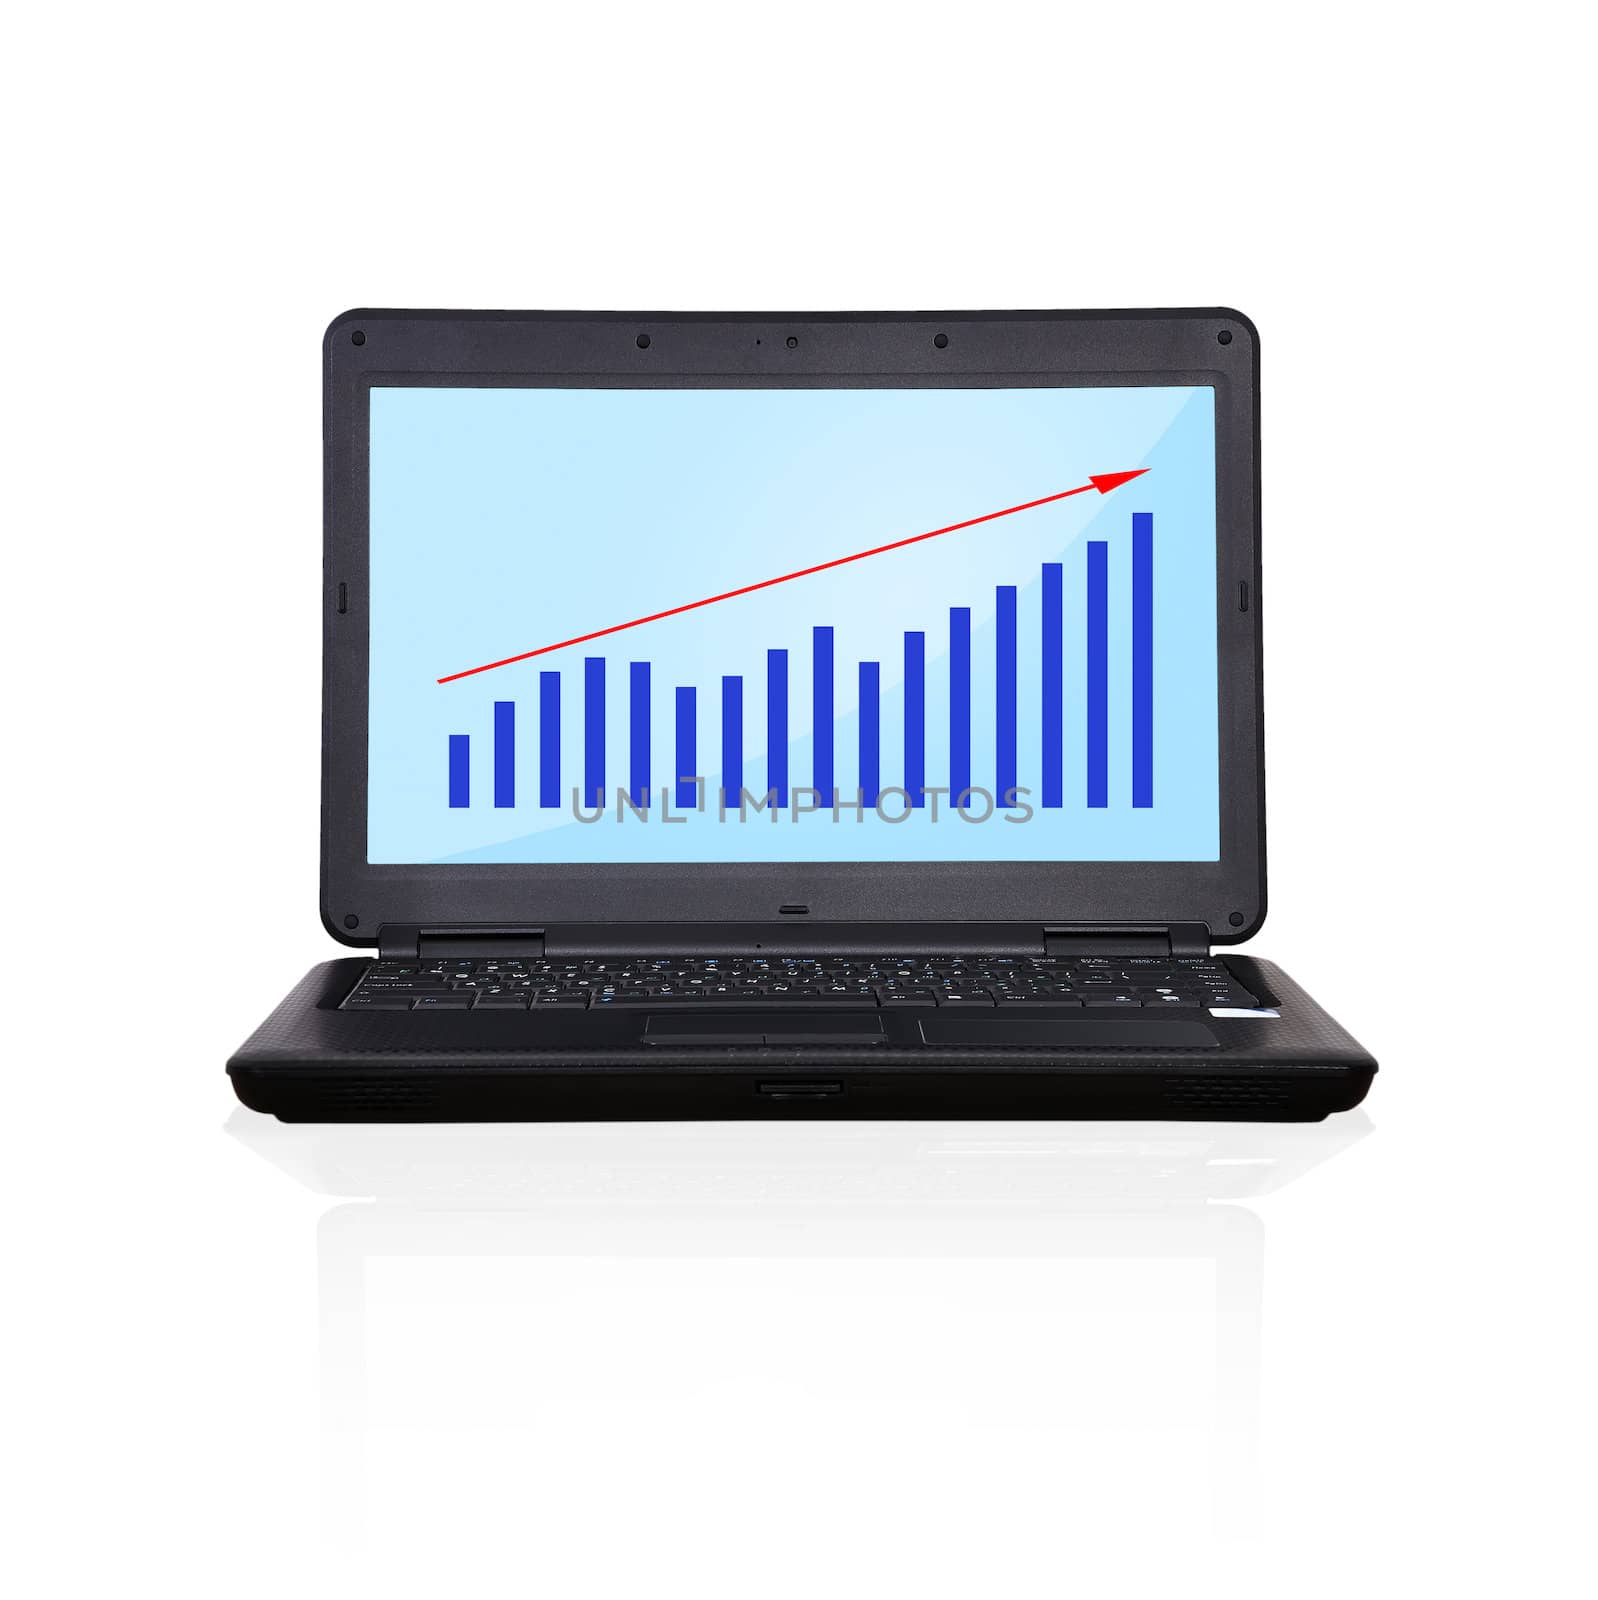 black laptop with graph on screen